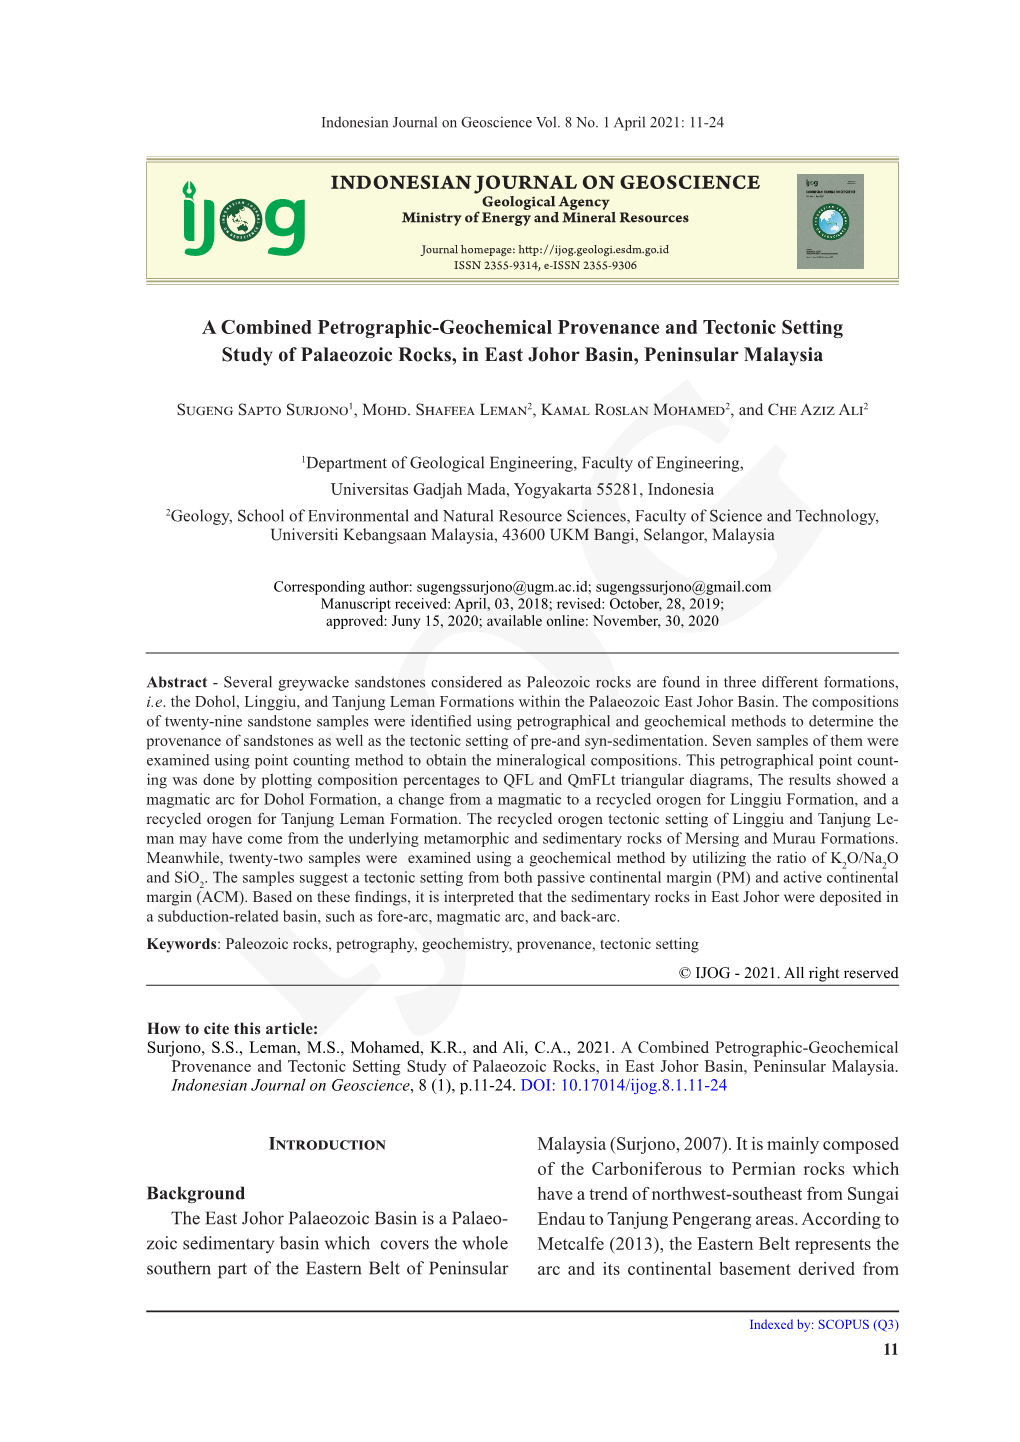 INDONESIAN JOURNAL on GEOSCIENCE a Combined Petrographic-Geochemical Provenance and Tectonic Setting Study of Palaeozoic Rocks